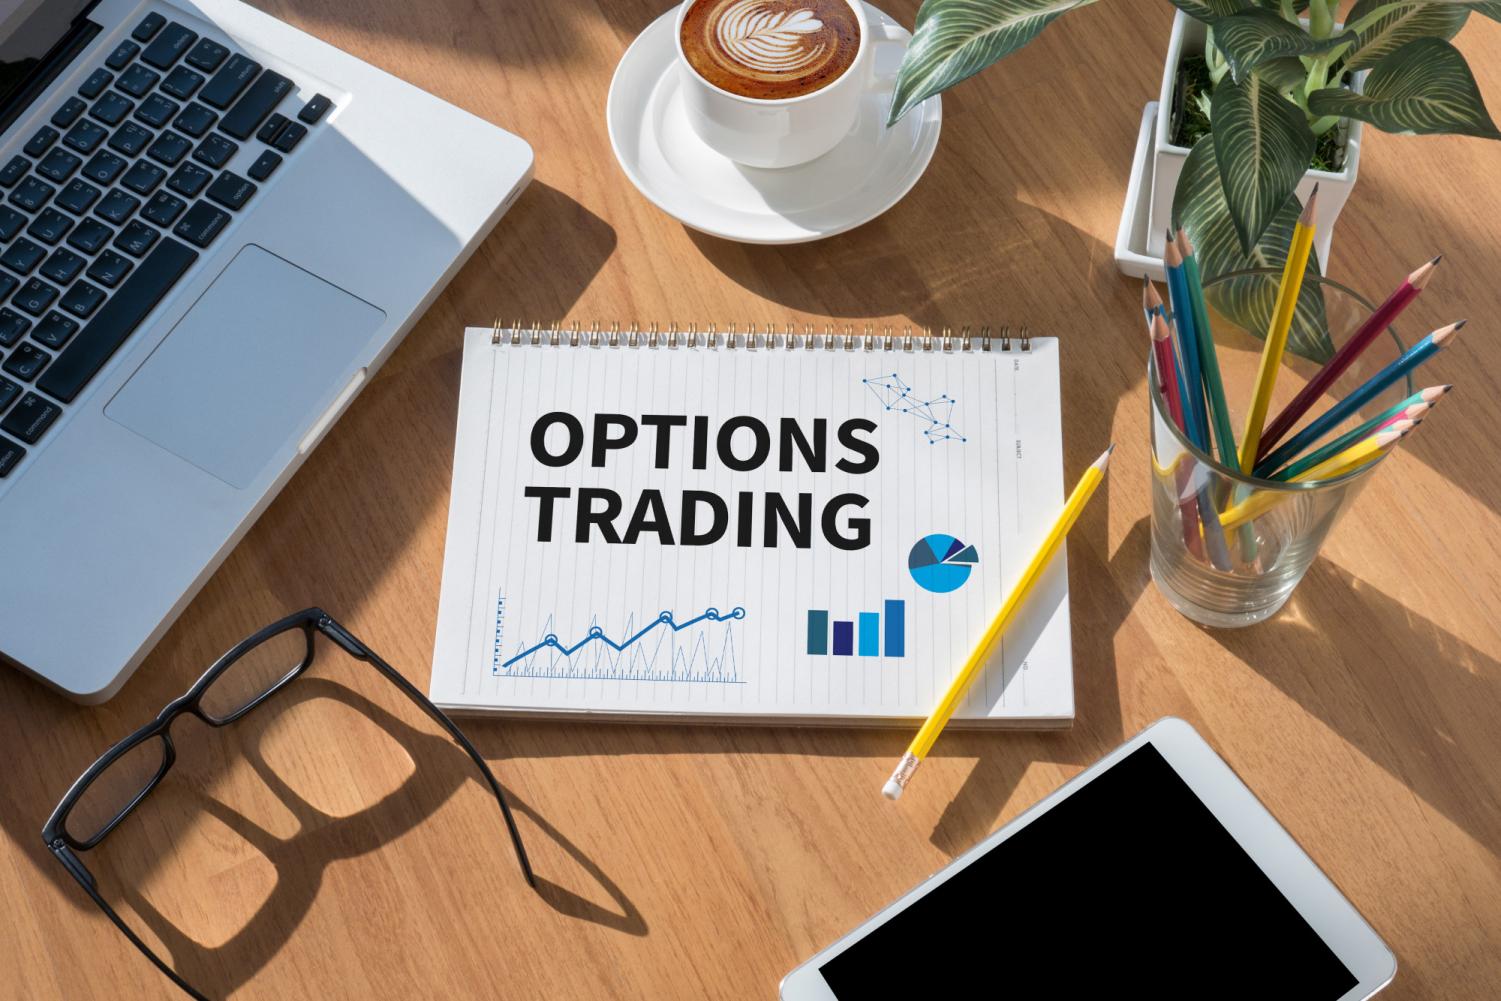 Trading Tips: 7 of the Best Option Strategies to Know - The Daily Iowan